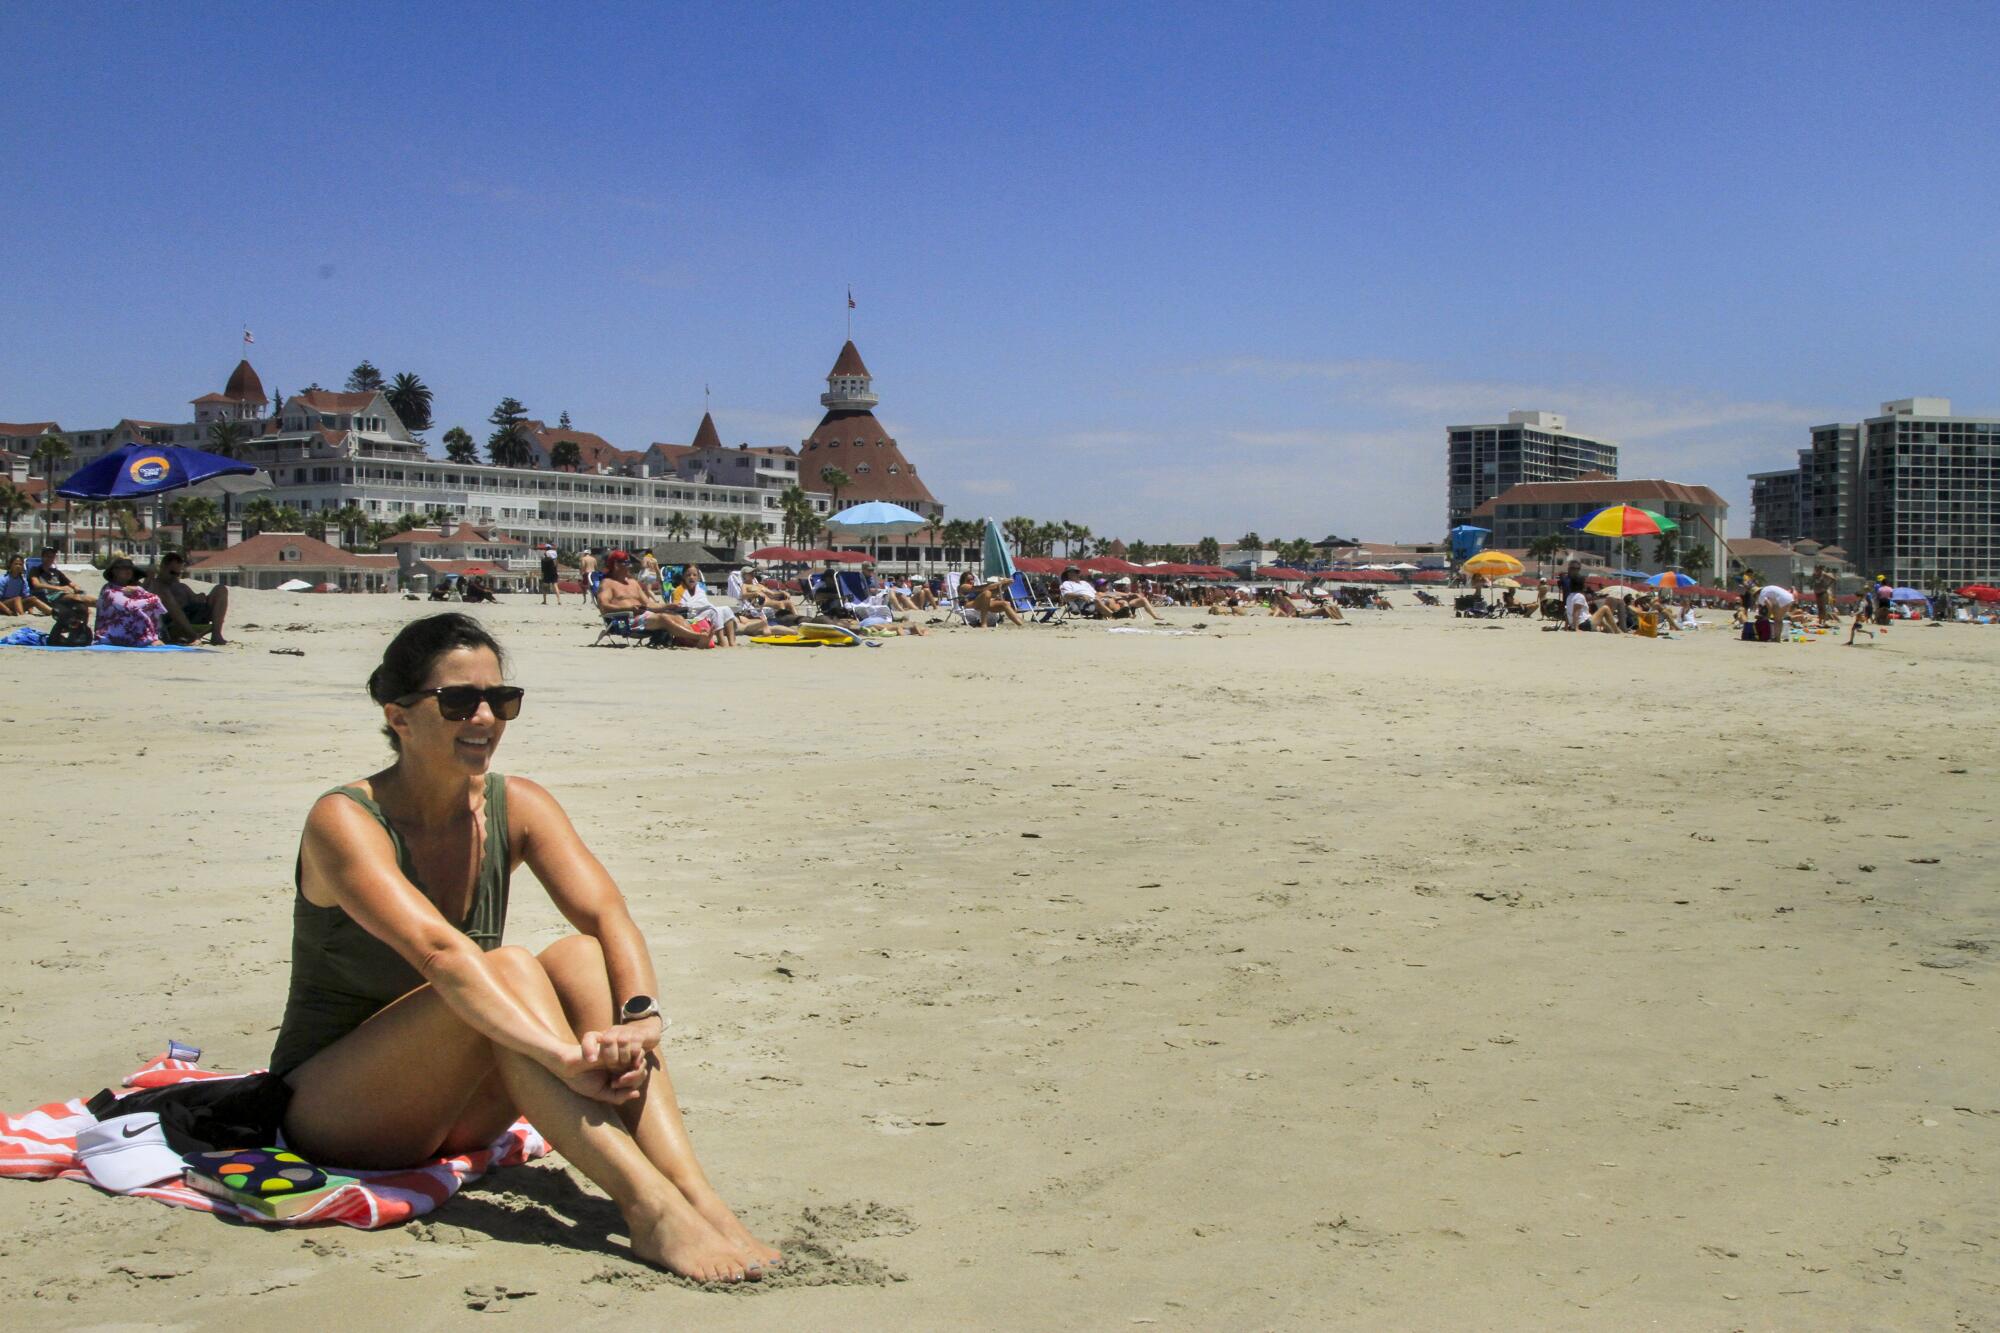 A woman in a bathing suit sits on the beach with the Hotel del Coronado in the background.